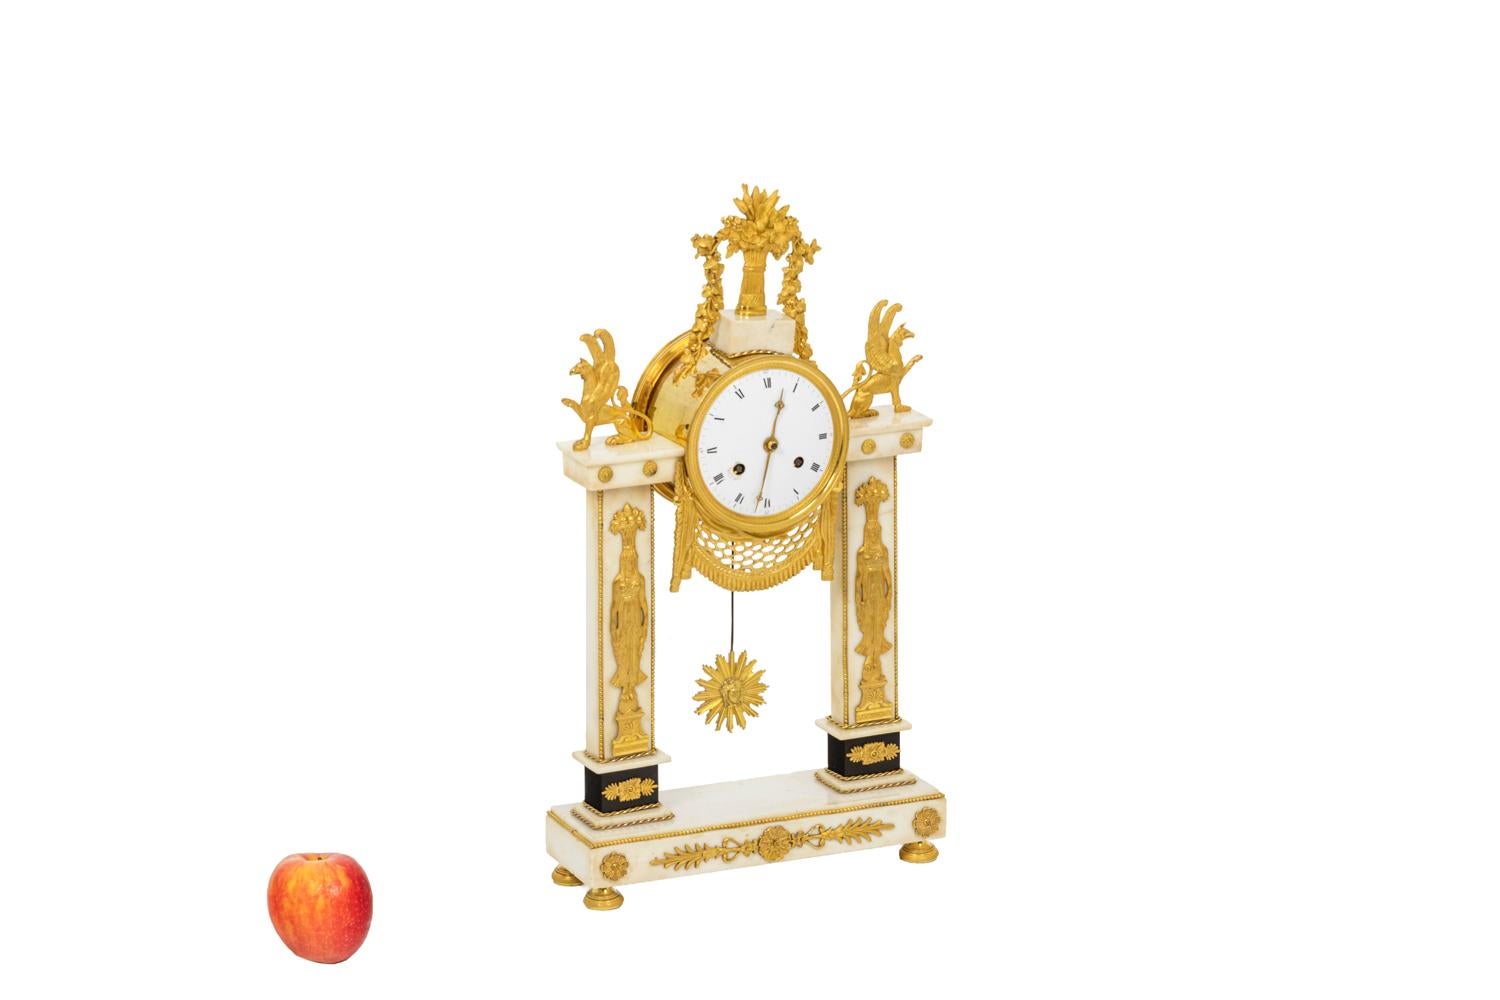 Portico clock in chiseled and gilt bronze composed of a rectangular base in white marble. Architecture with two columns topped by griffins holding the dial. The columns are decorated with two Egyptian goddesses and foliage. Dial in white enamel